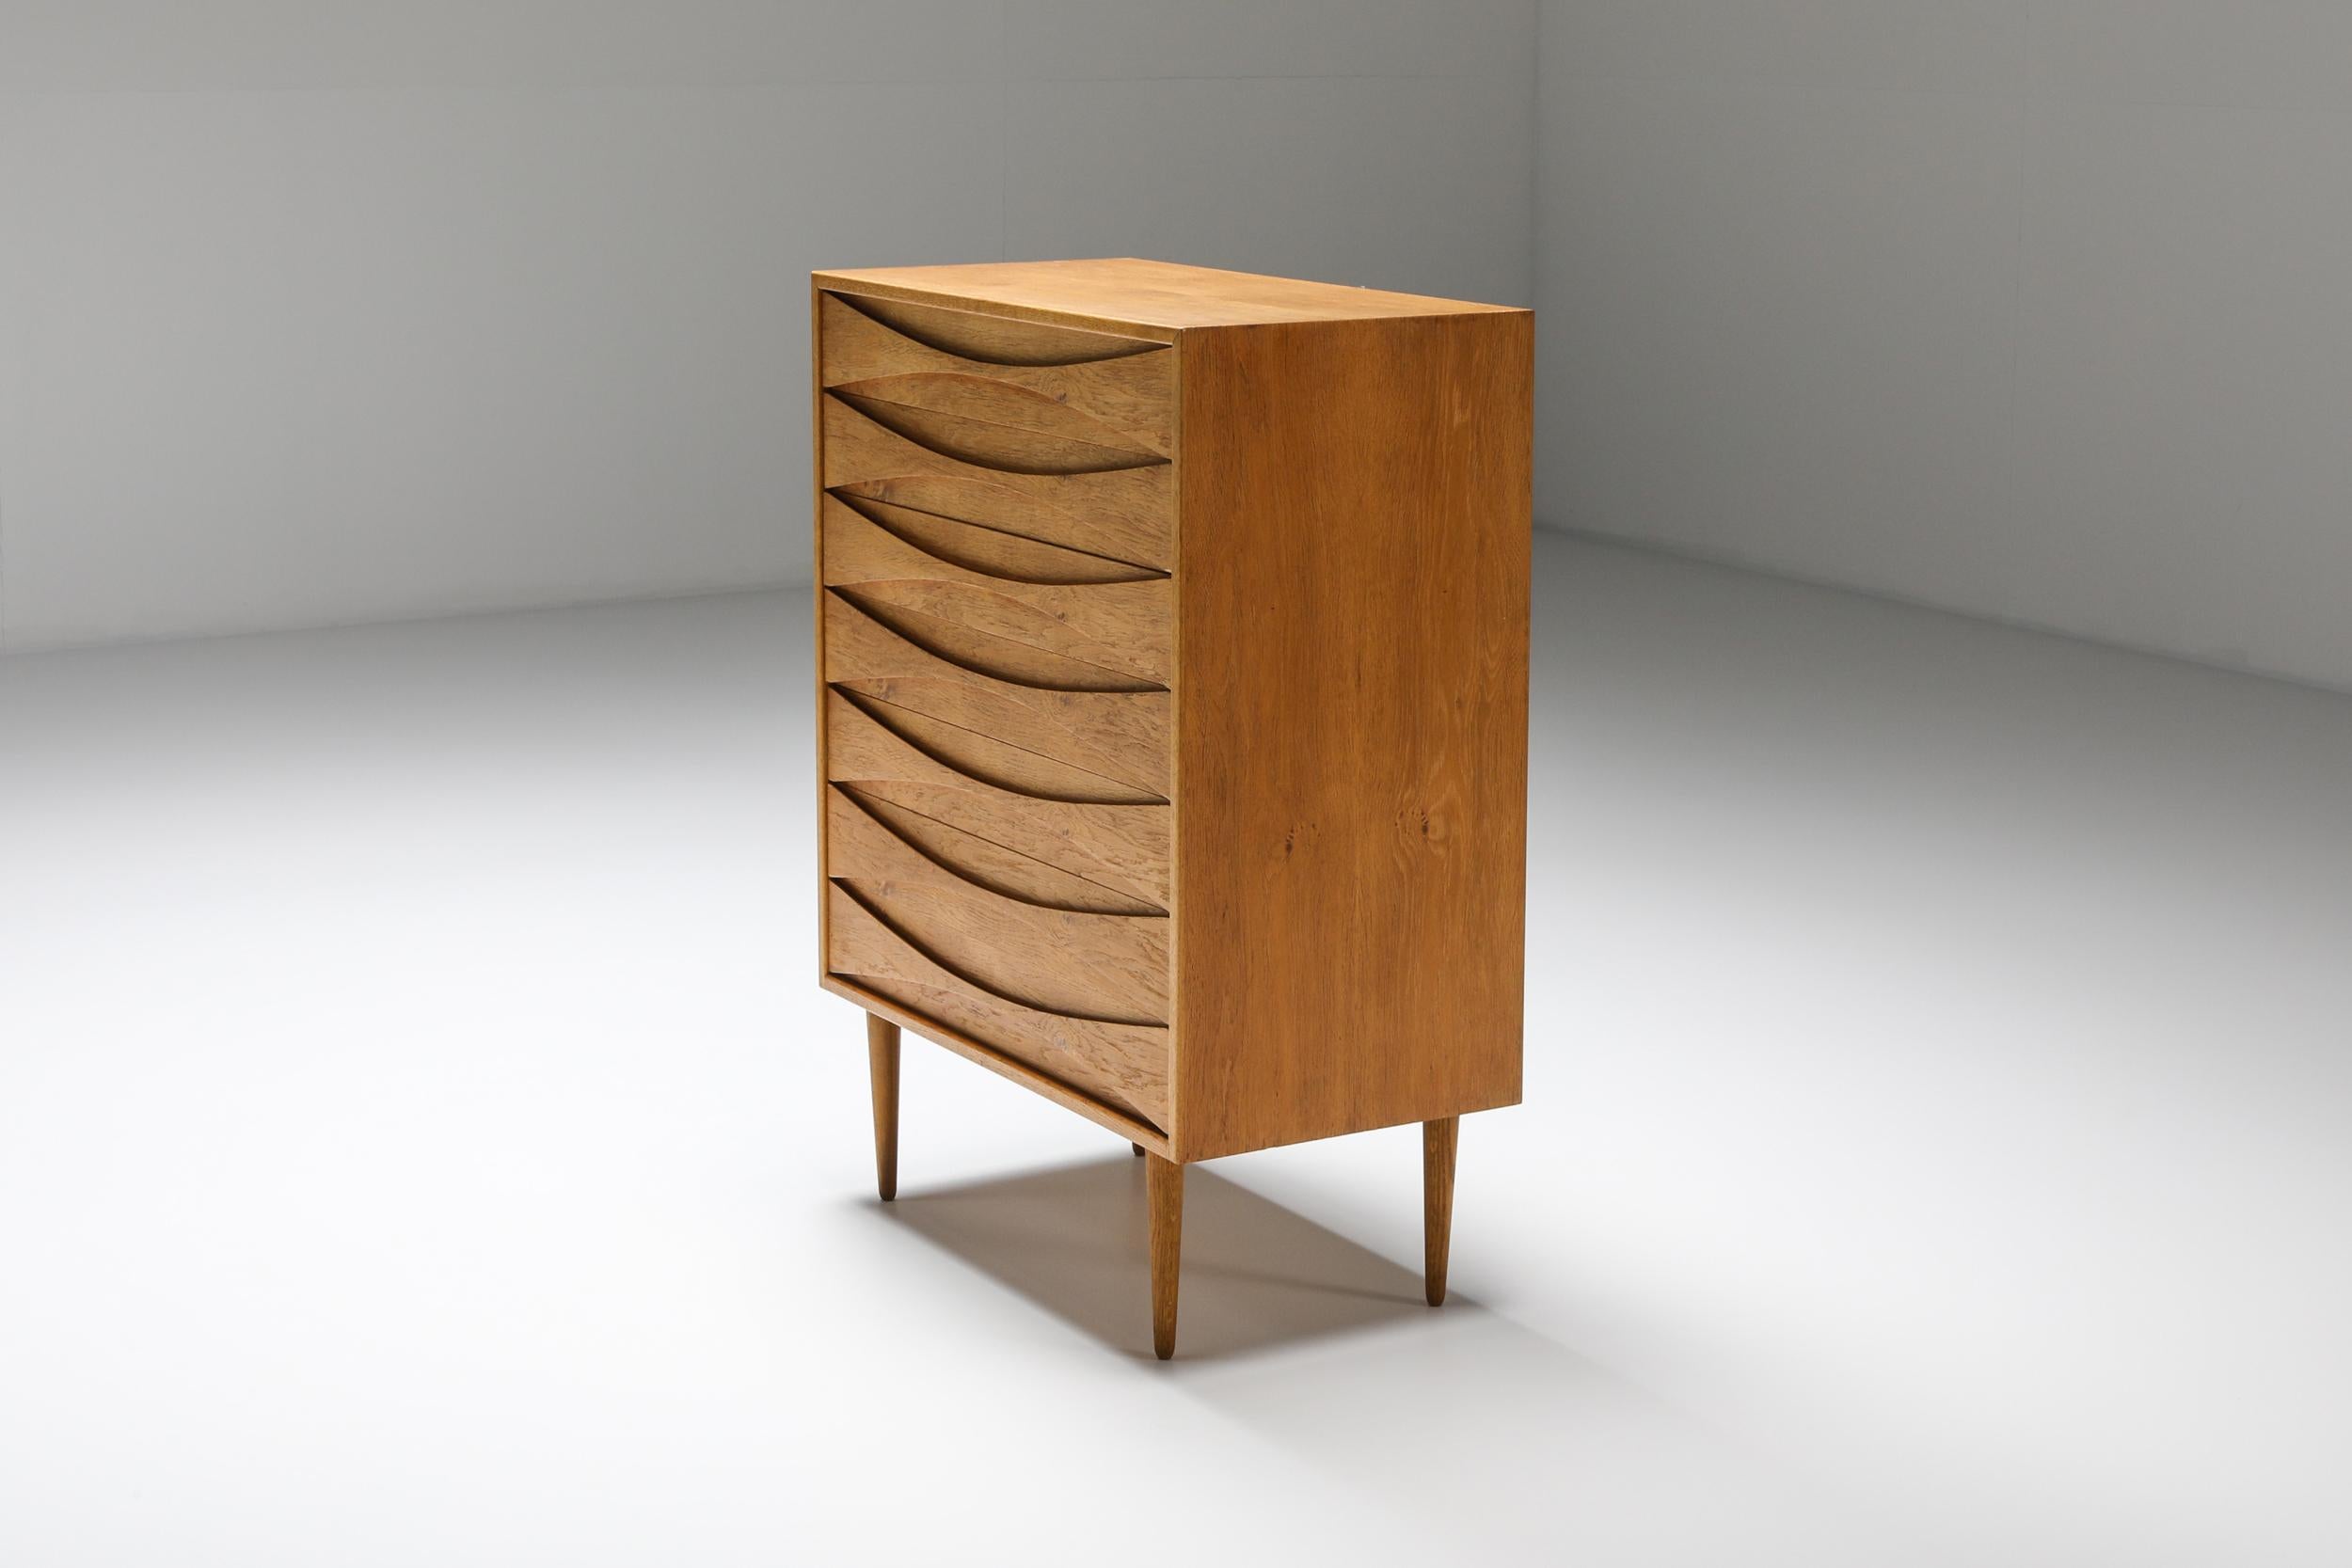 Scandinavian modern chest of drawers, oak, Arne Vodder, 1960s Denmark

Arne Vodder (1926-2009) should be counted among the most influential Scandinavian midcentury designers, although he is not as well-known as for instance Hans Wegner or Arne